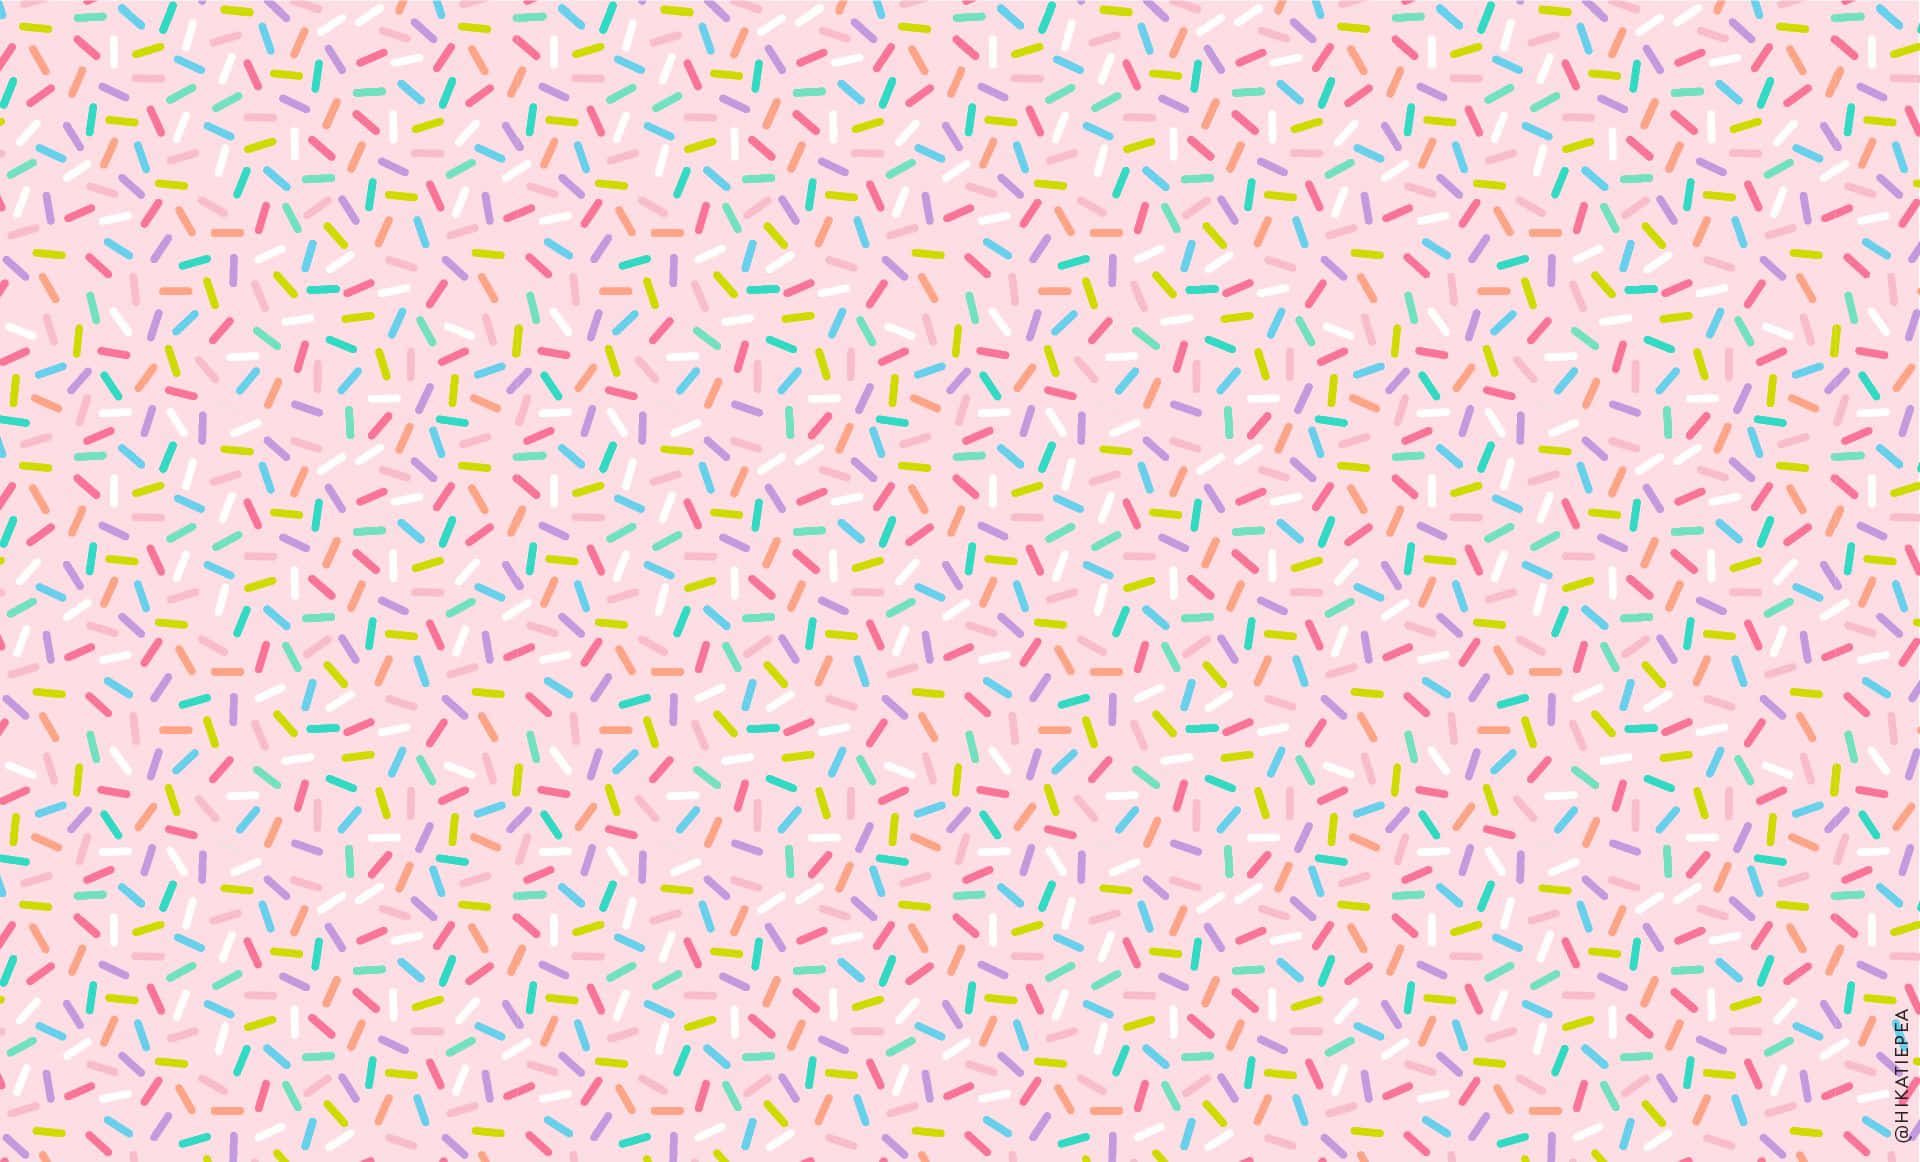 Sprinkles Photos, Download The BEST Free Sprinkles Stock Photos & HD Images